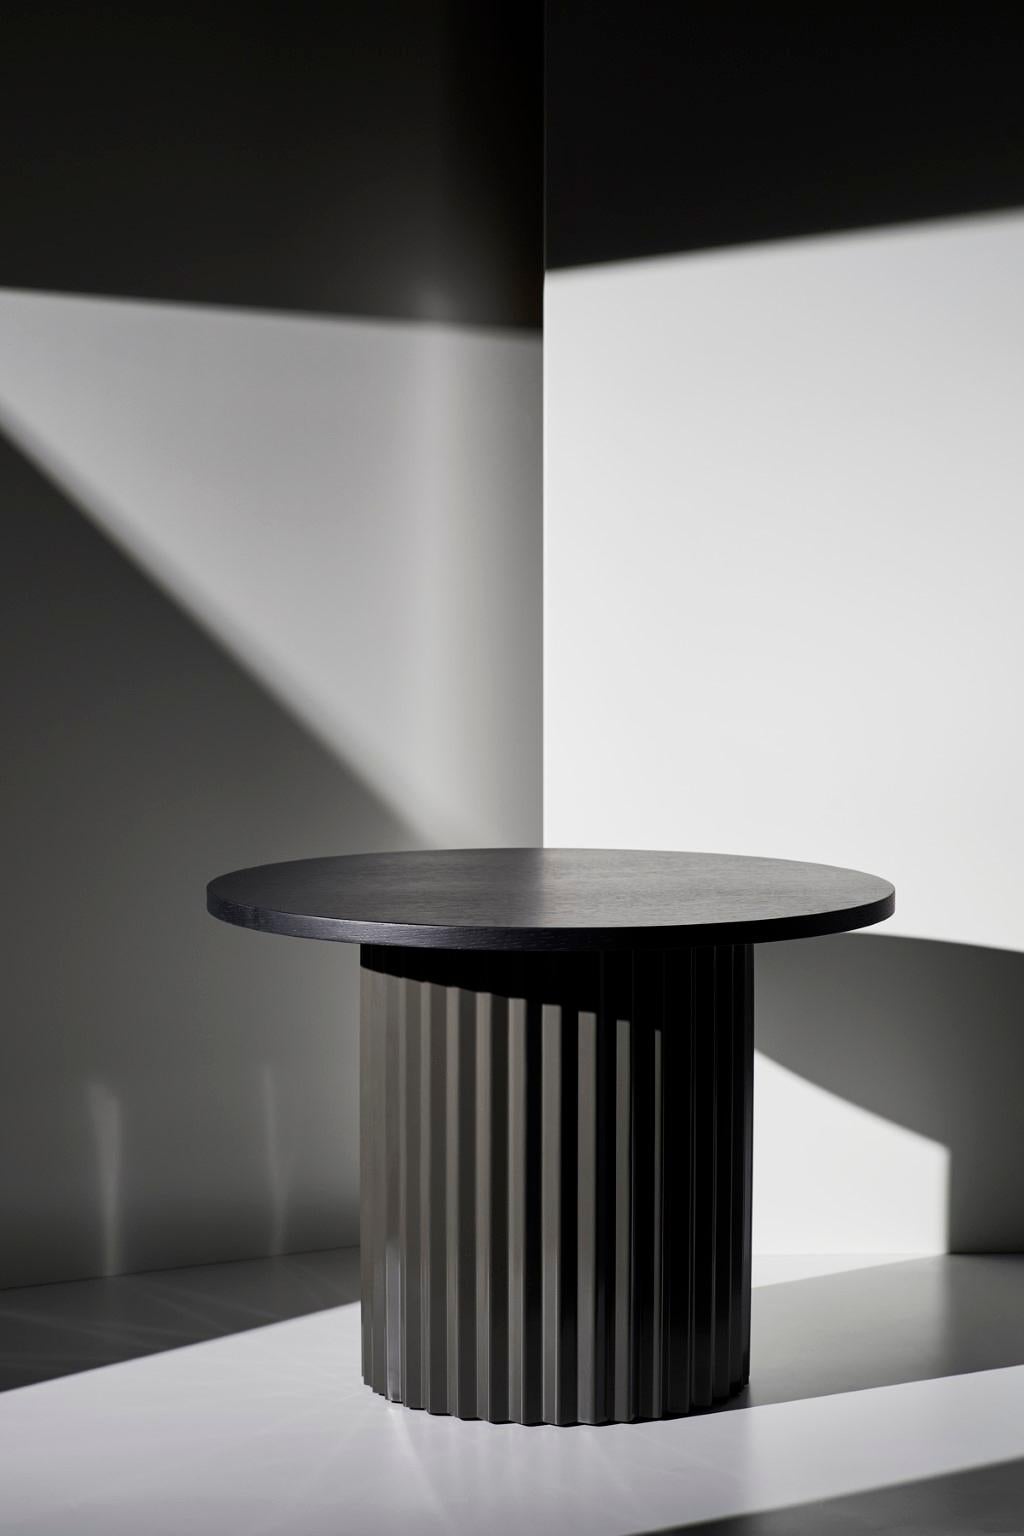 Set of 2 marble tables by Lisette Rützou
Dimensions: 
D 60 x H 41 cm
D 40 x H 41 cm
Materials: marble tabletop, brass column.


Lisette Rützou’s design is motivated by an urge to articulate a story. Inspired by the beauty of materials, form